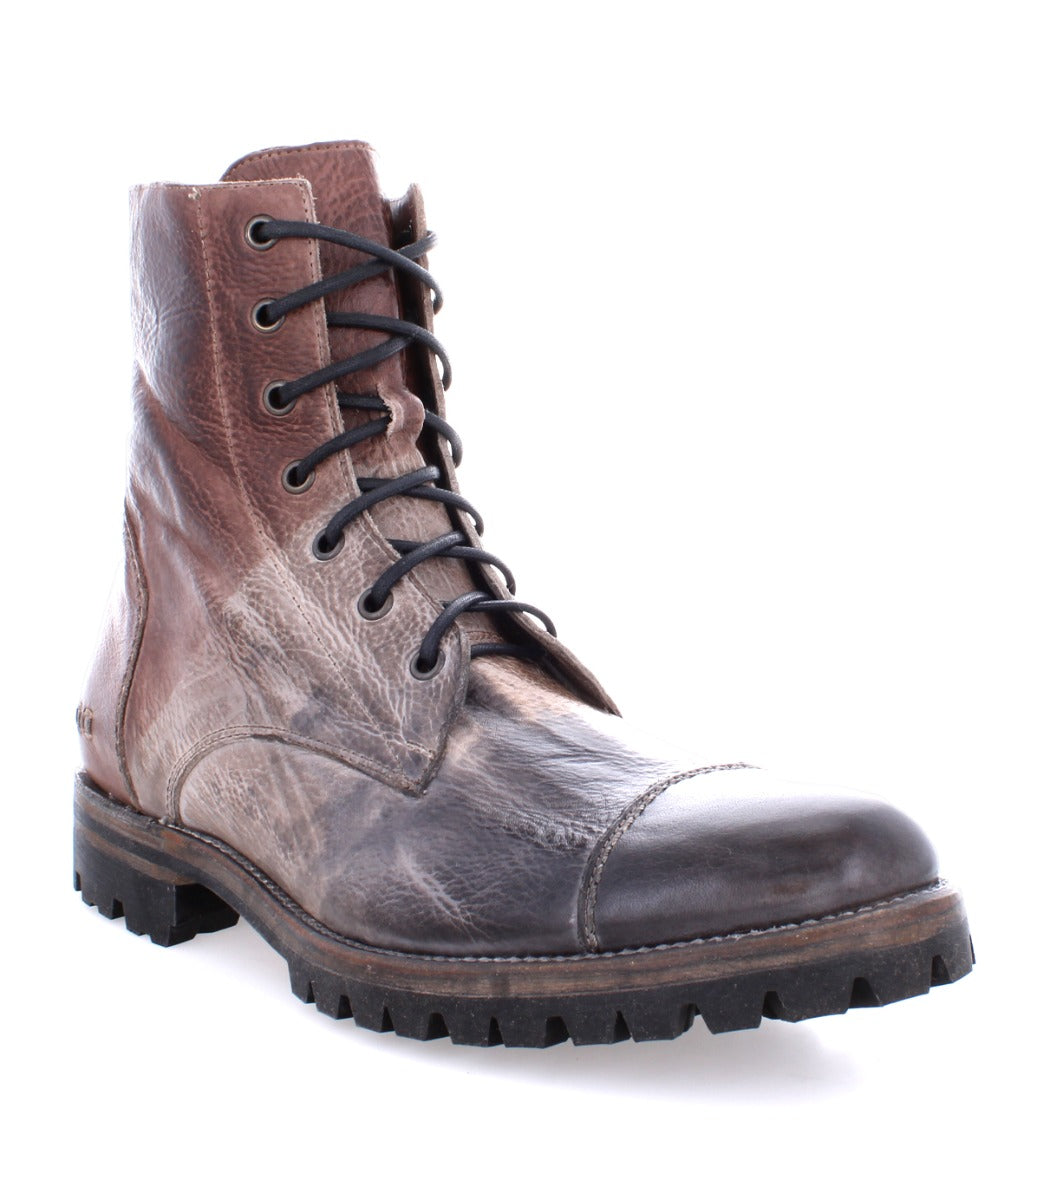 A men's brown leather Protege Trek boot with laces from Bed Stu.